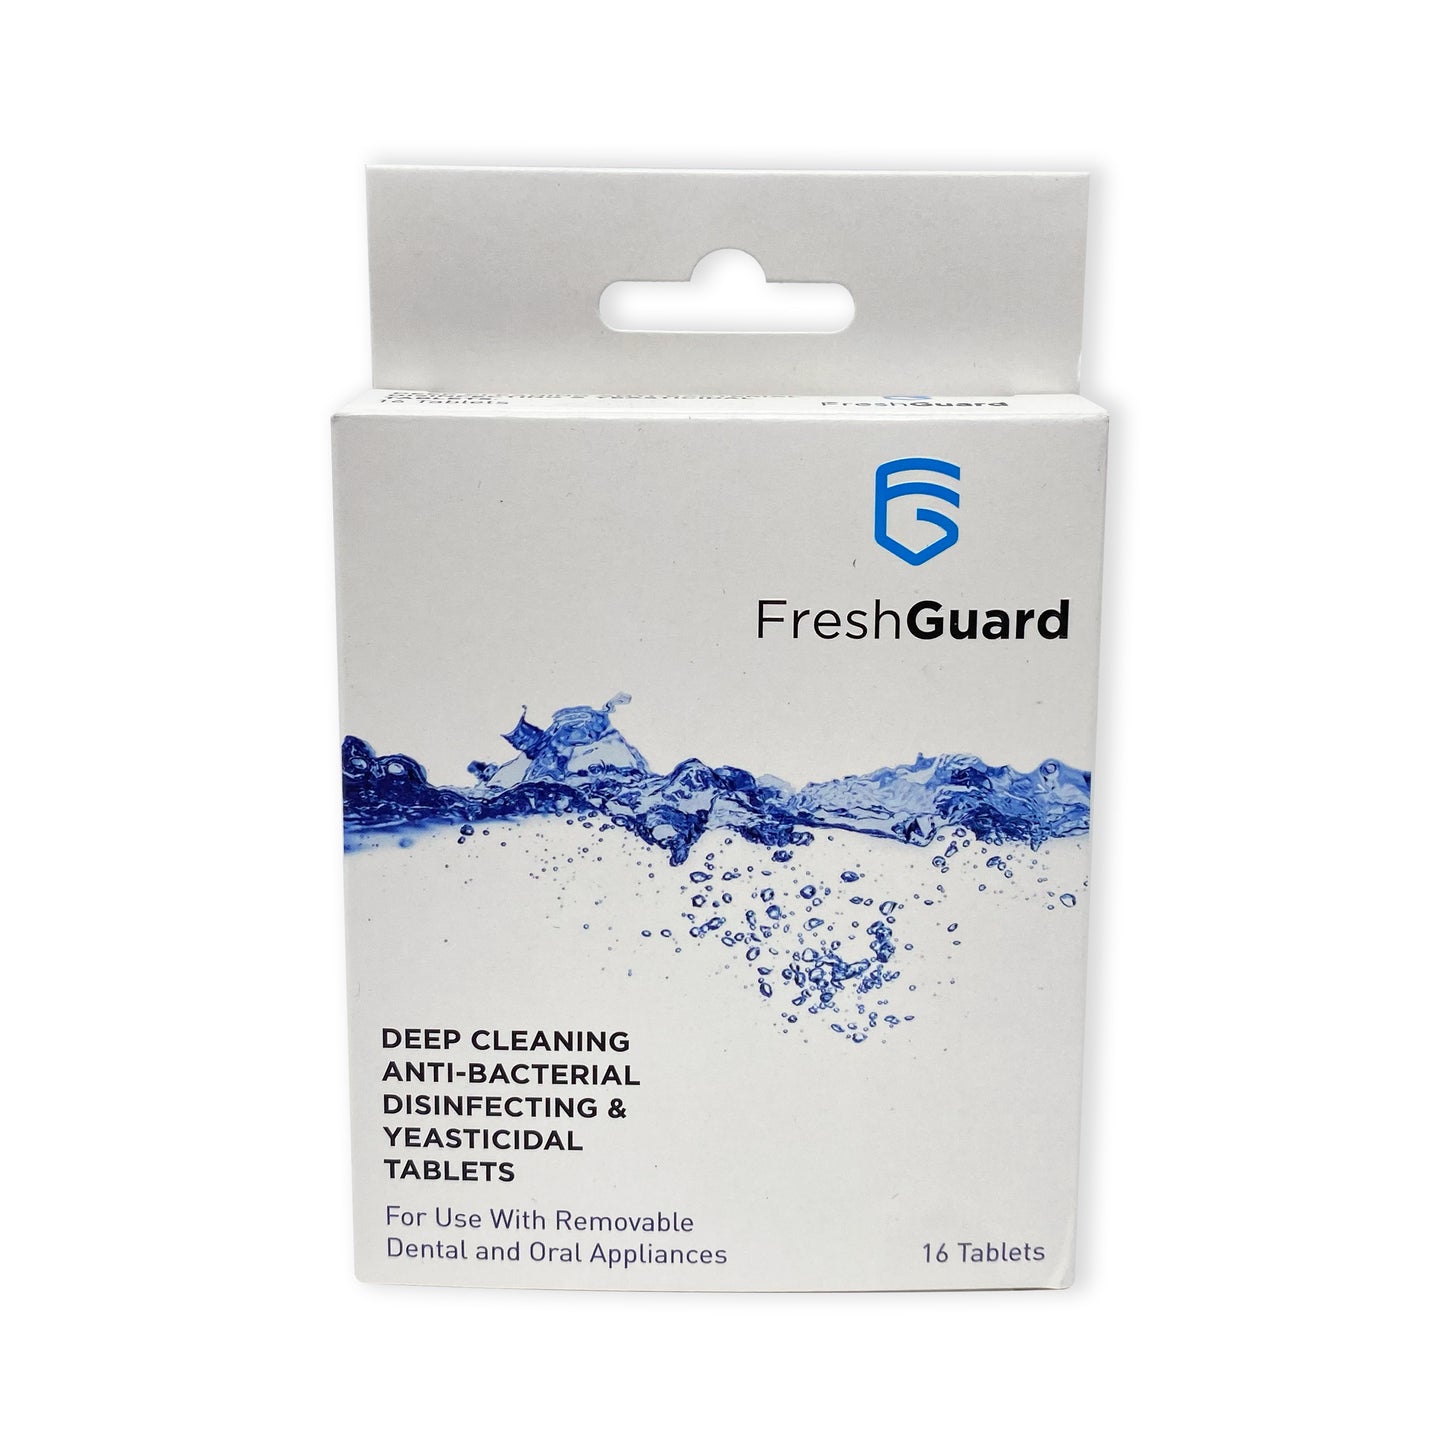 FreshGuard Disinfecting Tablets - 16